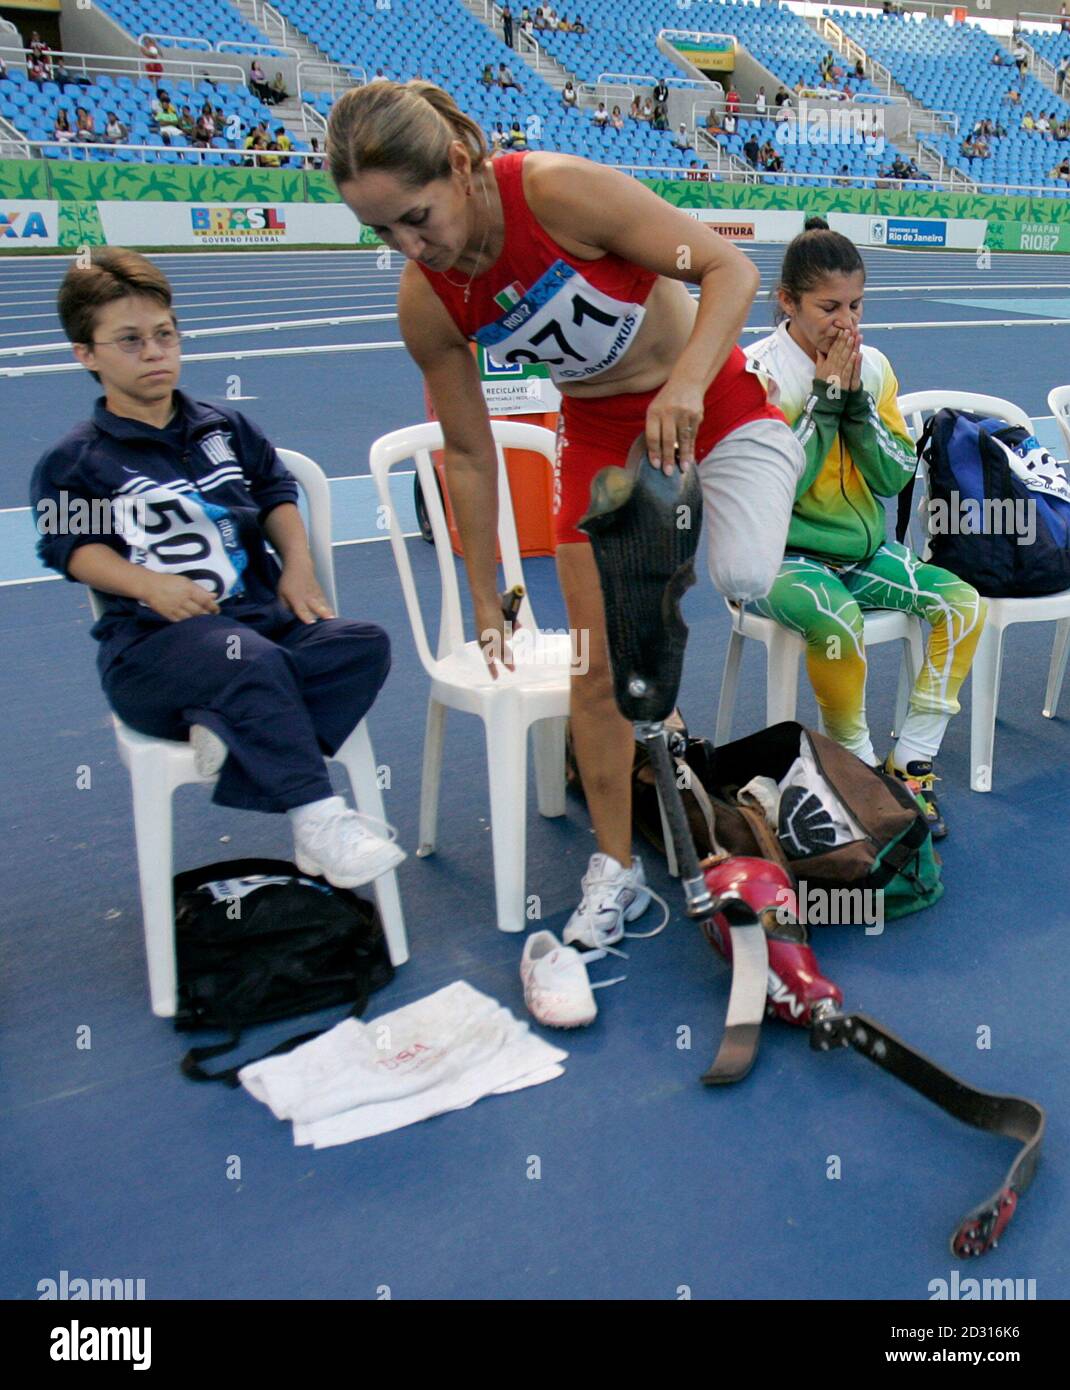 Mexico's Cor Bustamante (C) changes her prosthetics after the women's 100m T46 during the Parapan American Games in Rio de Janeiro August 15, 2007.  REUTERS/Bruno Domingos (BRAZIL) Stock Photo